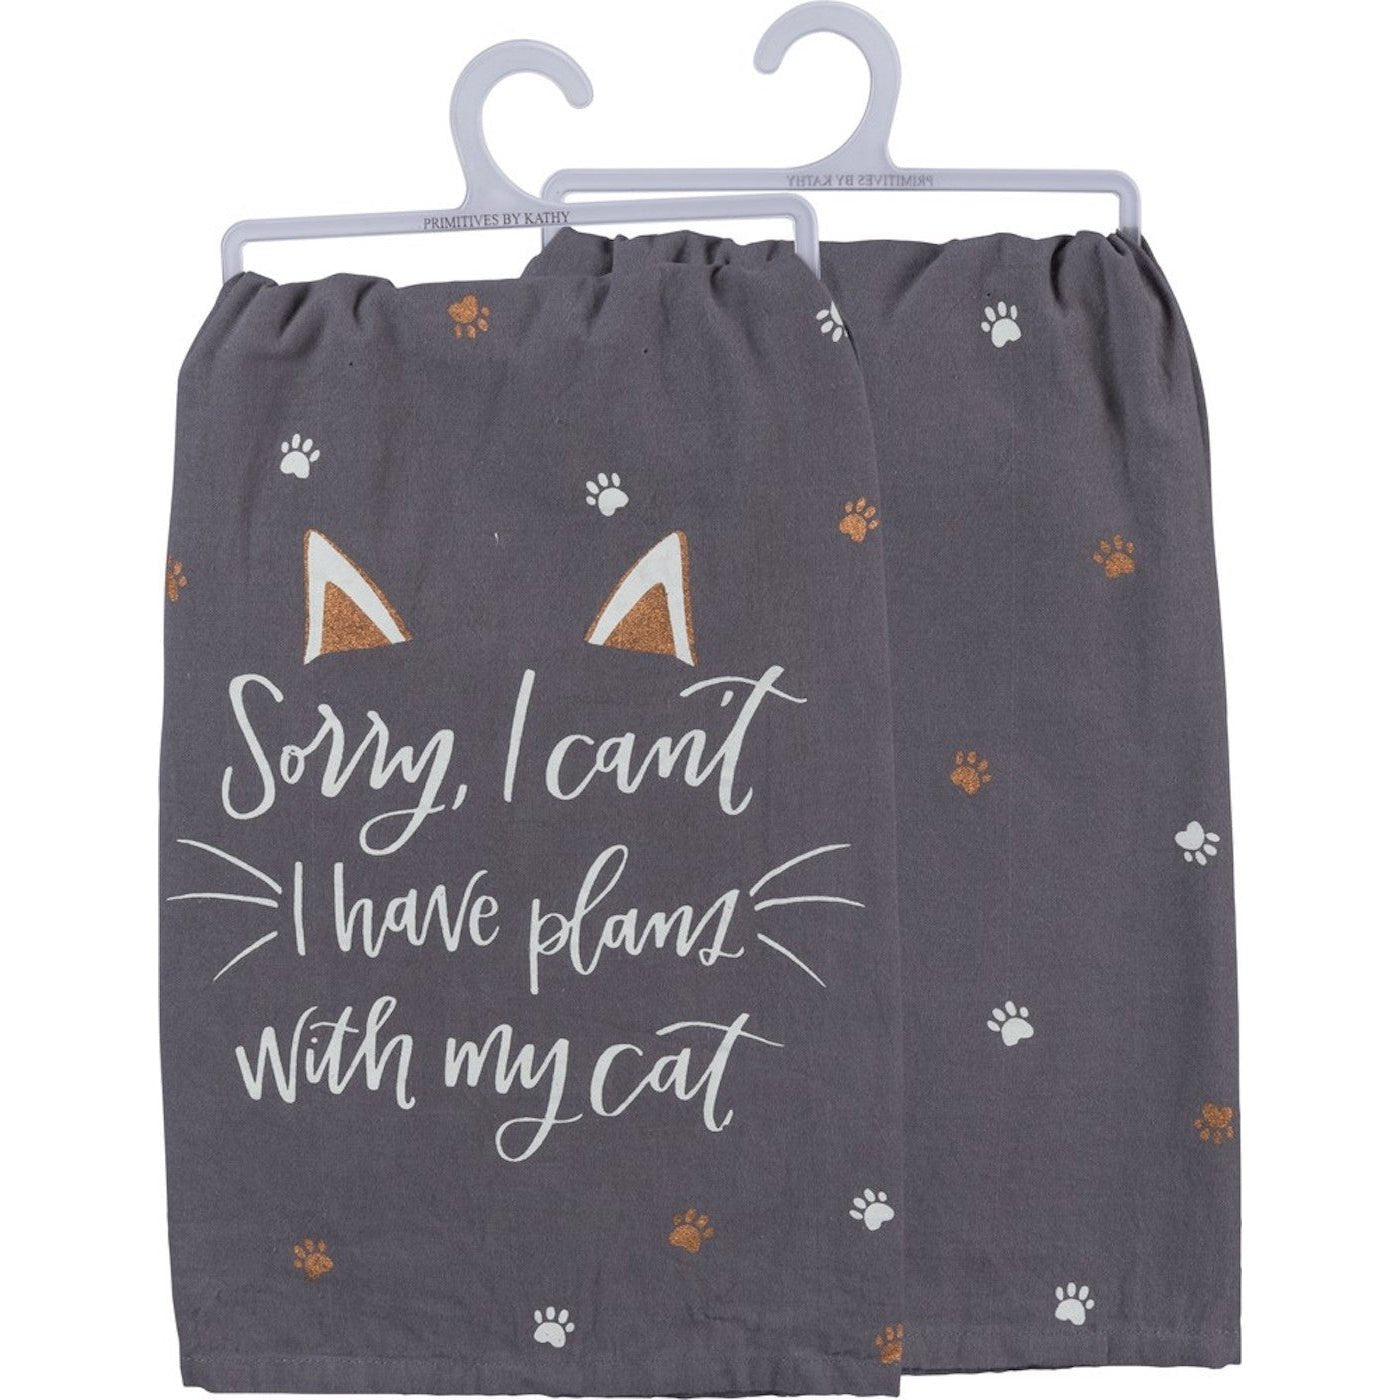 Sorry..Plans With My Cat Funny Snarky Dish Cloth Towel / Novelty Silly Tea Towels / Cute Hilarious Kitchen Hand Towel | 28" square